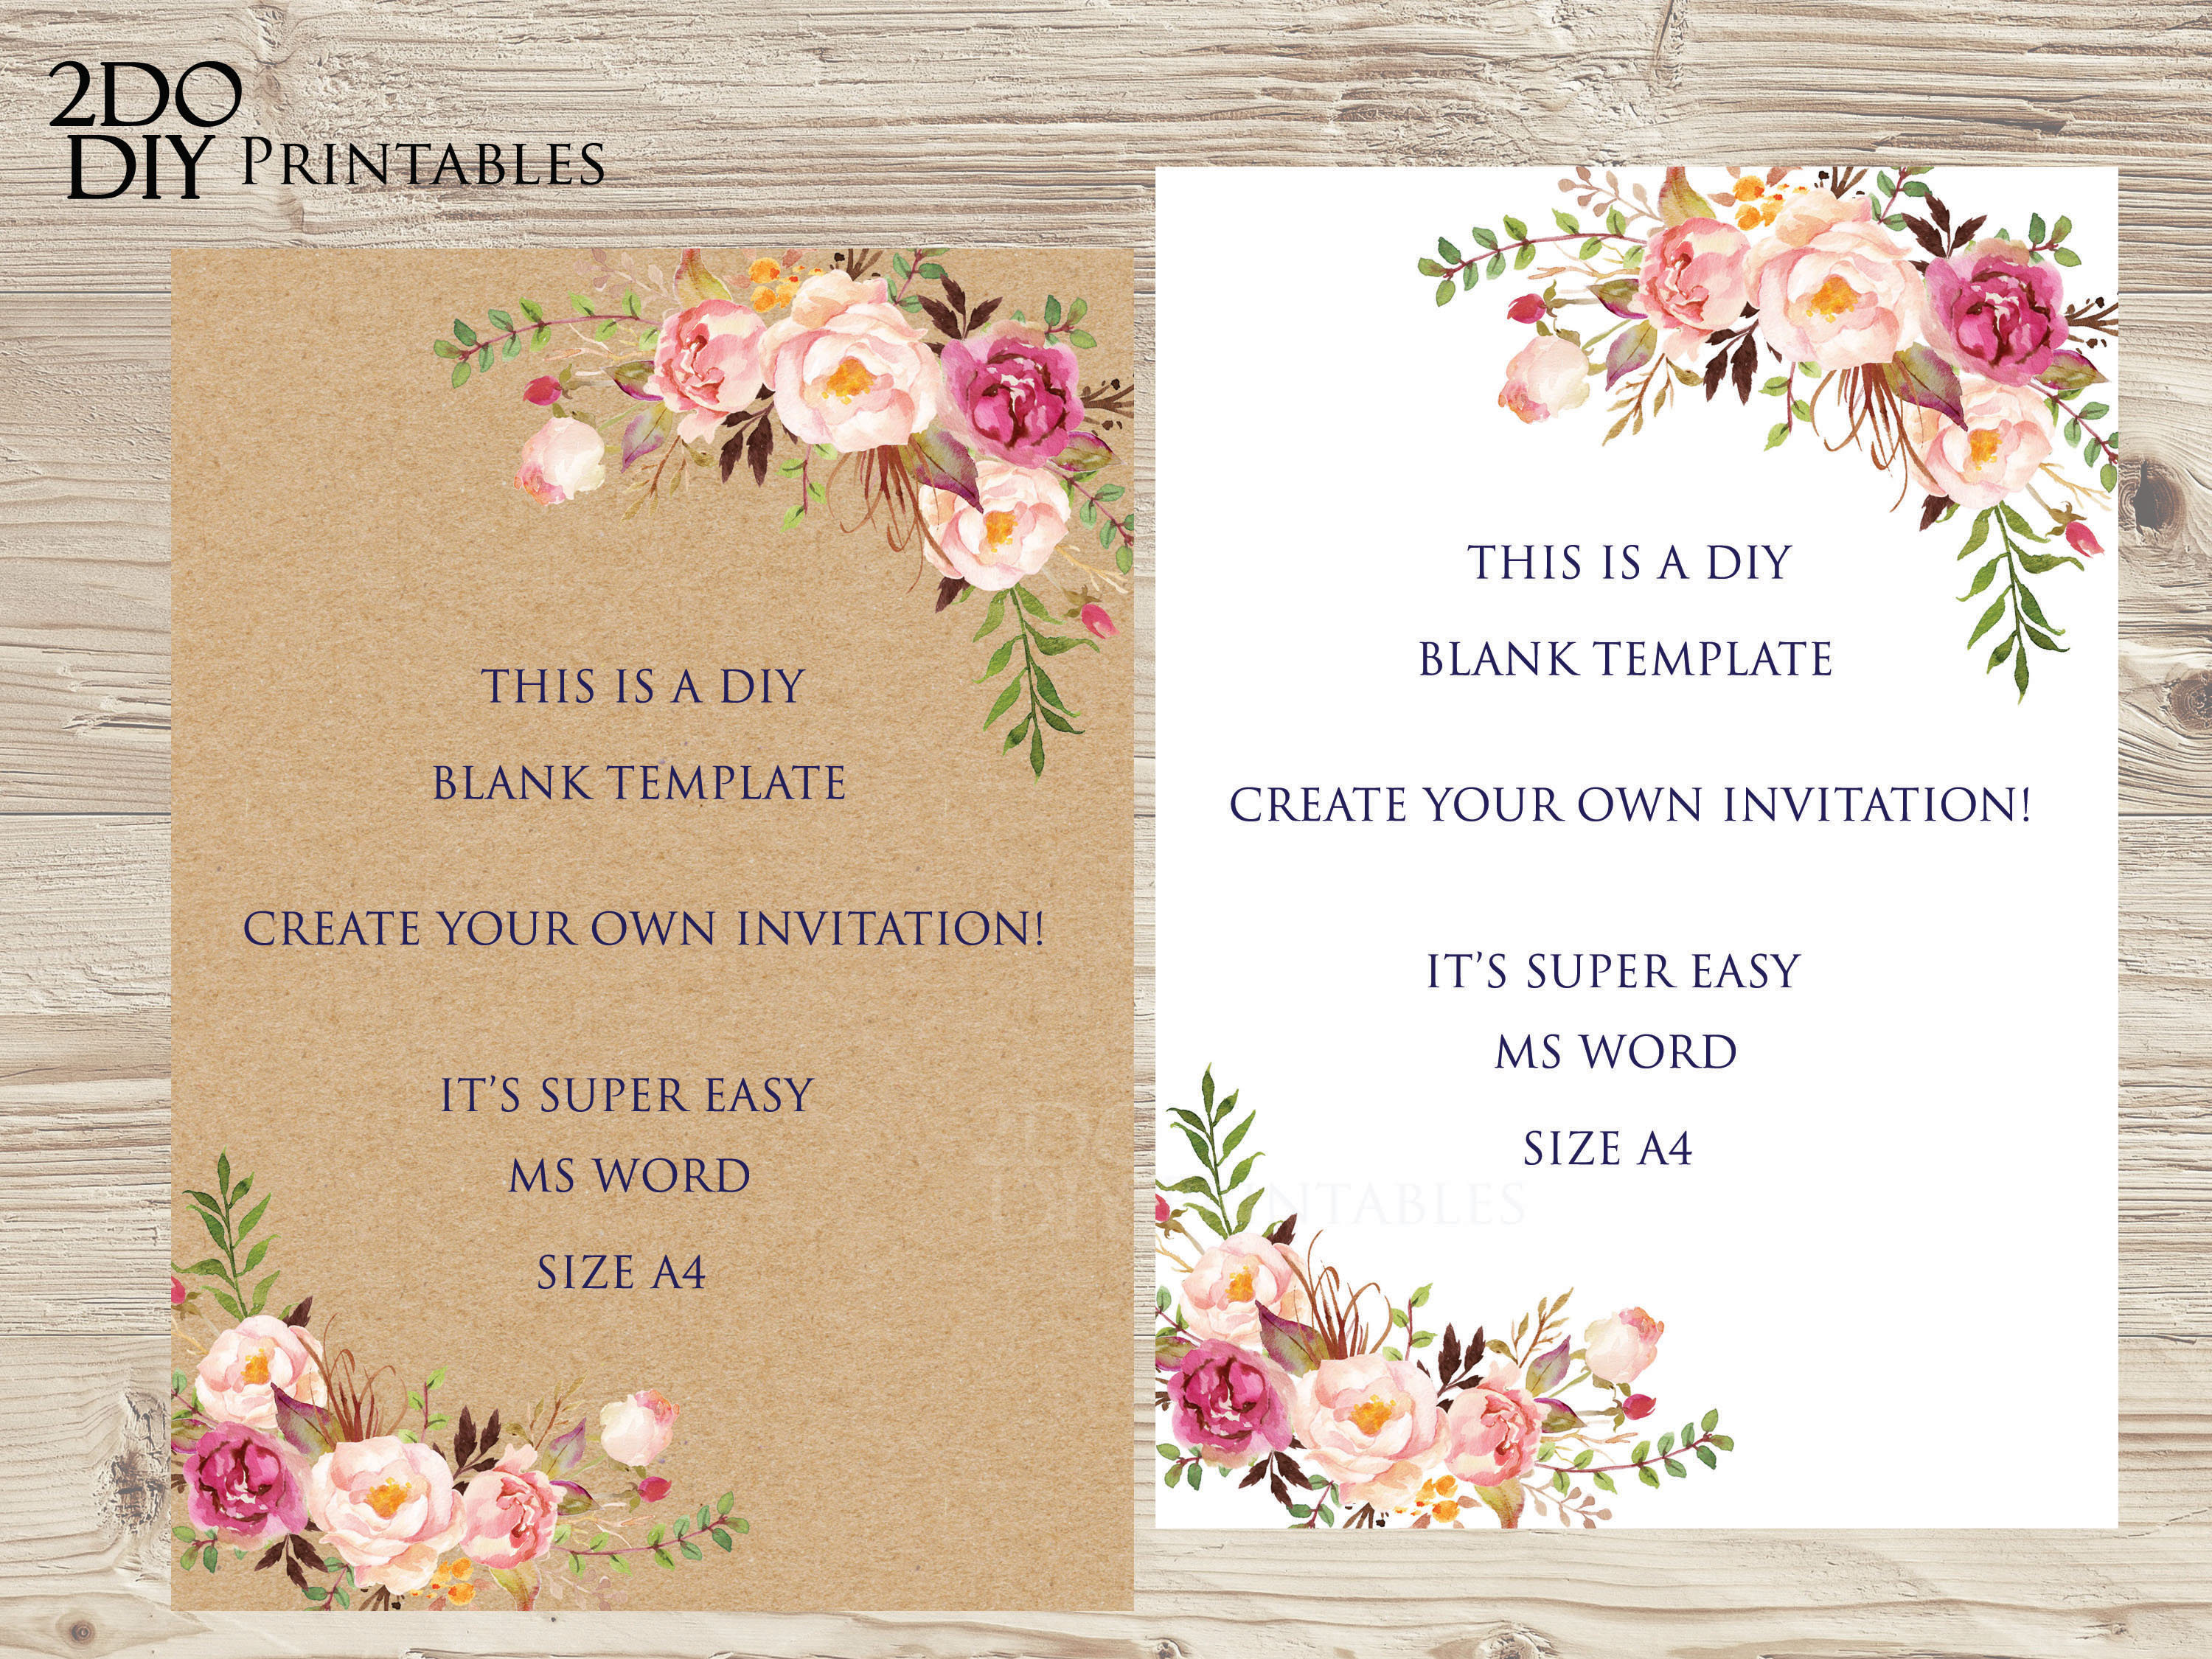 Floral Edit Yourself Invitation/ MS Word /Size A4/DIY Floral | Etsy